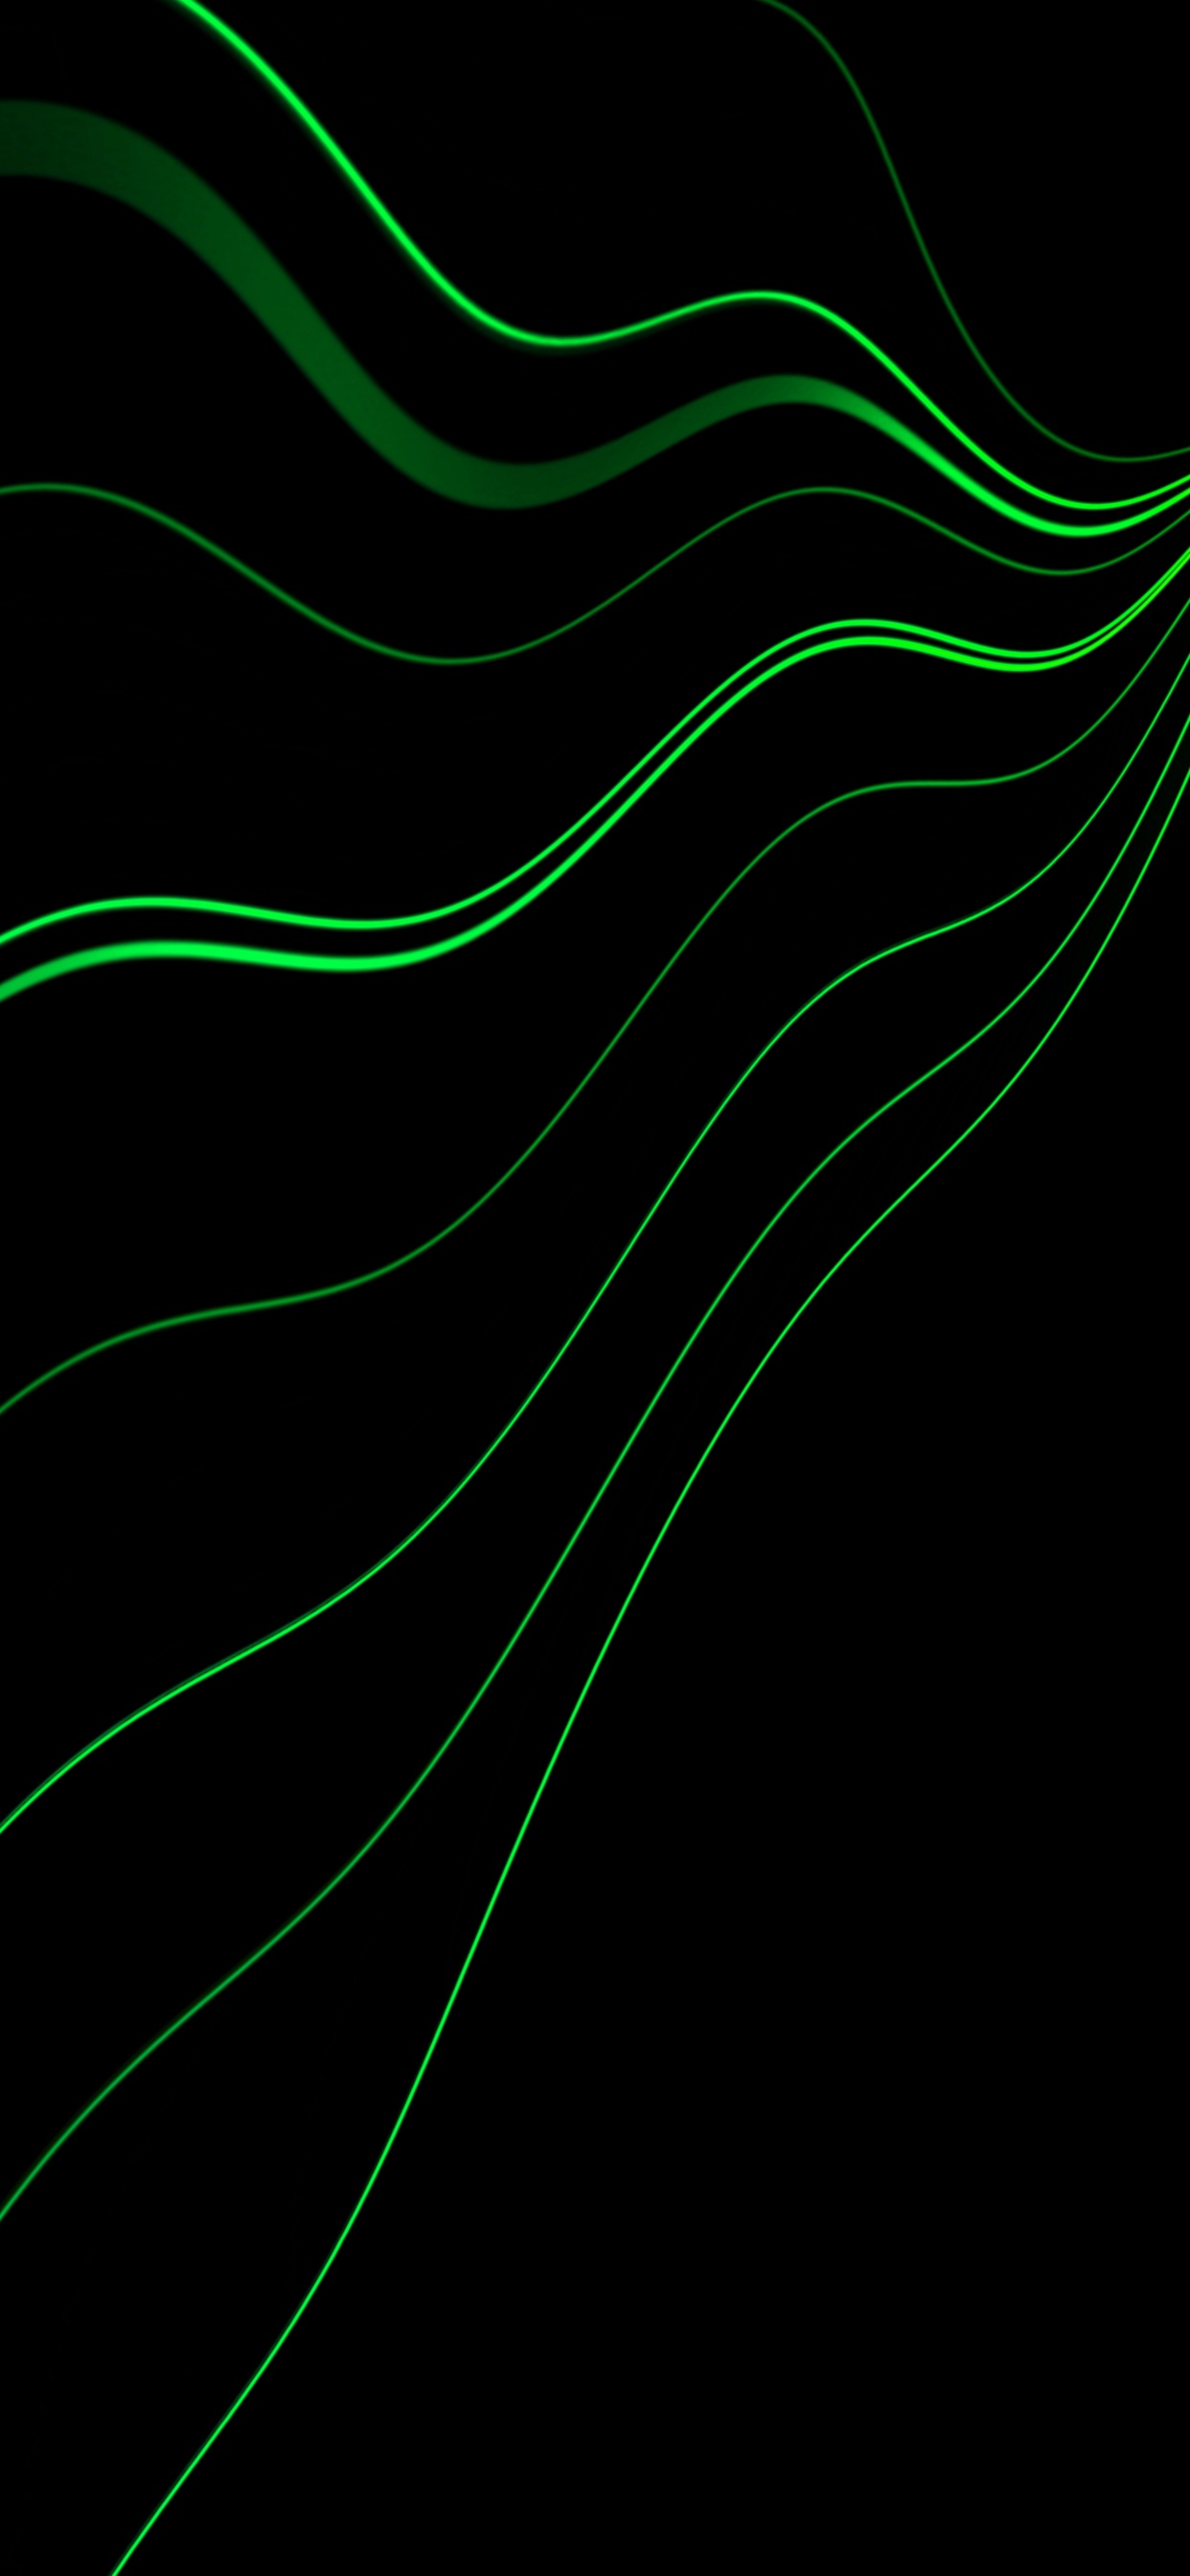 Green and White Line Illustration. Wallpaper in 1242x2688 Resolution